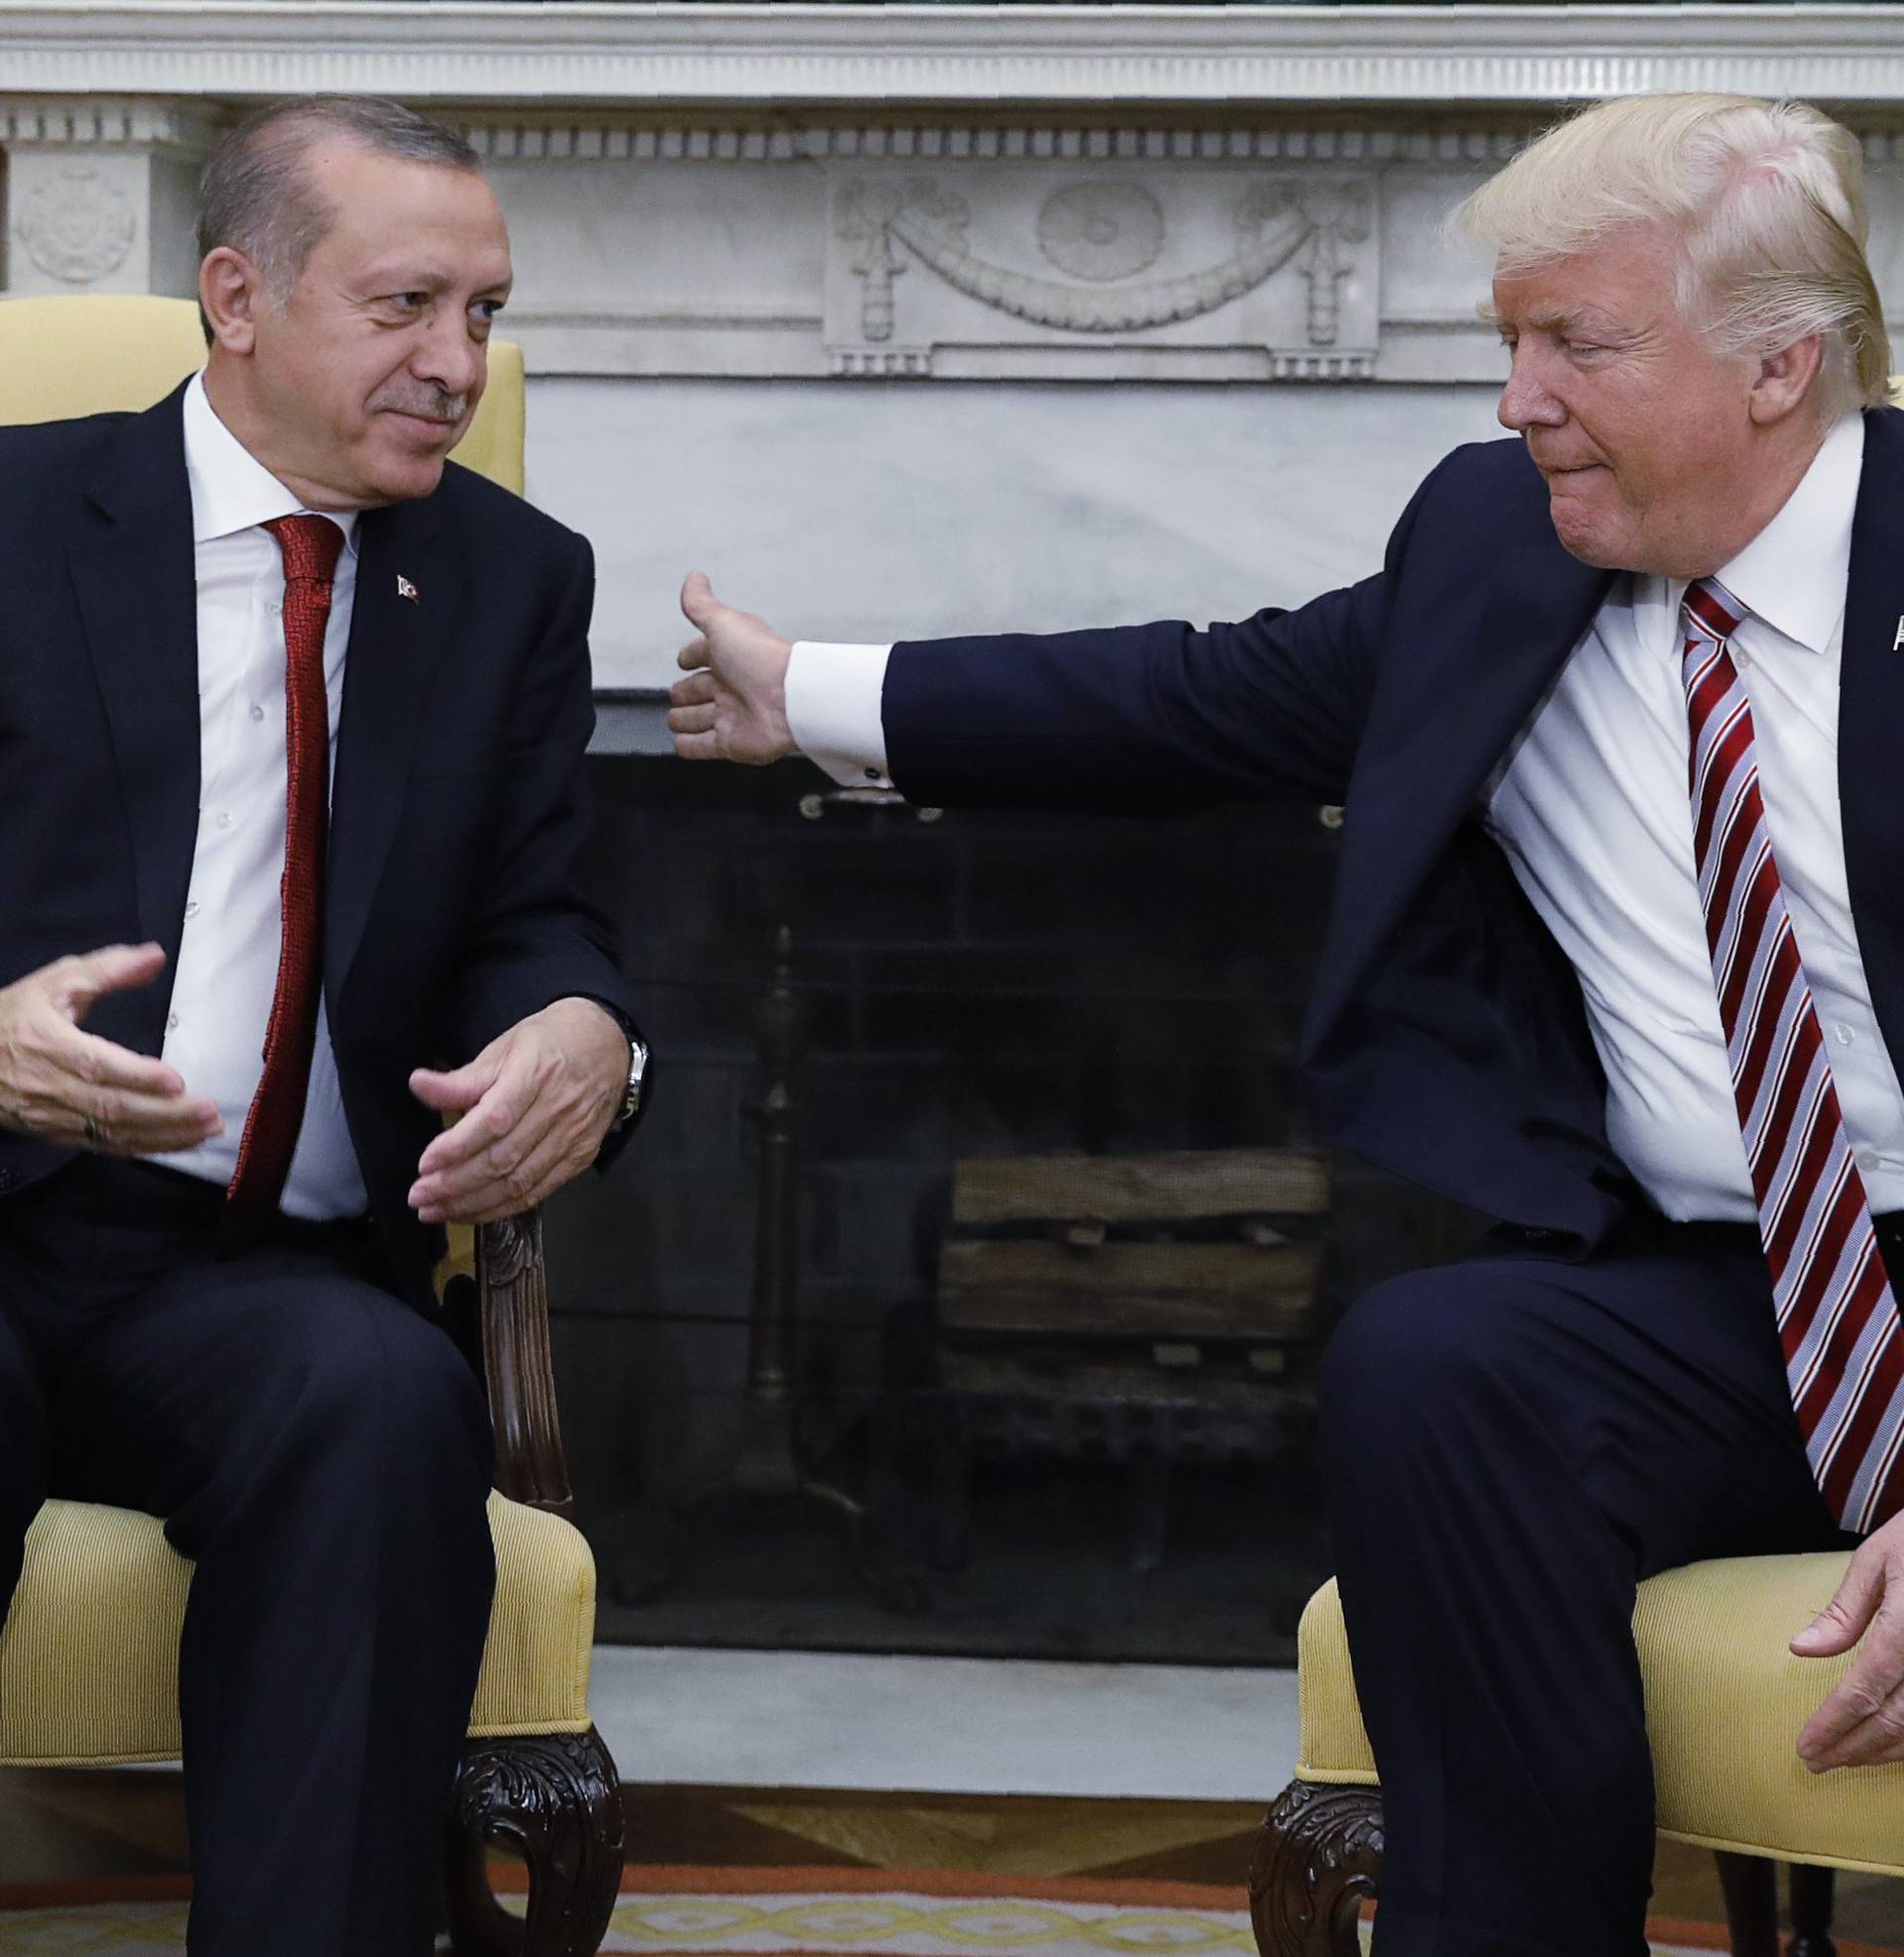 Turkey's President Erdogan meets with U.S. President Trump in the Oval Office of the White House in Washington